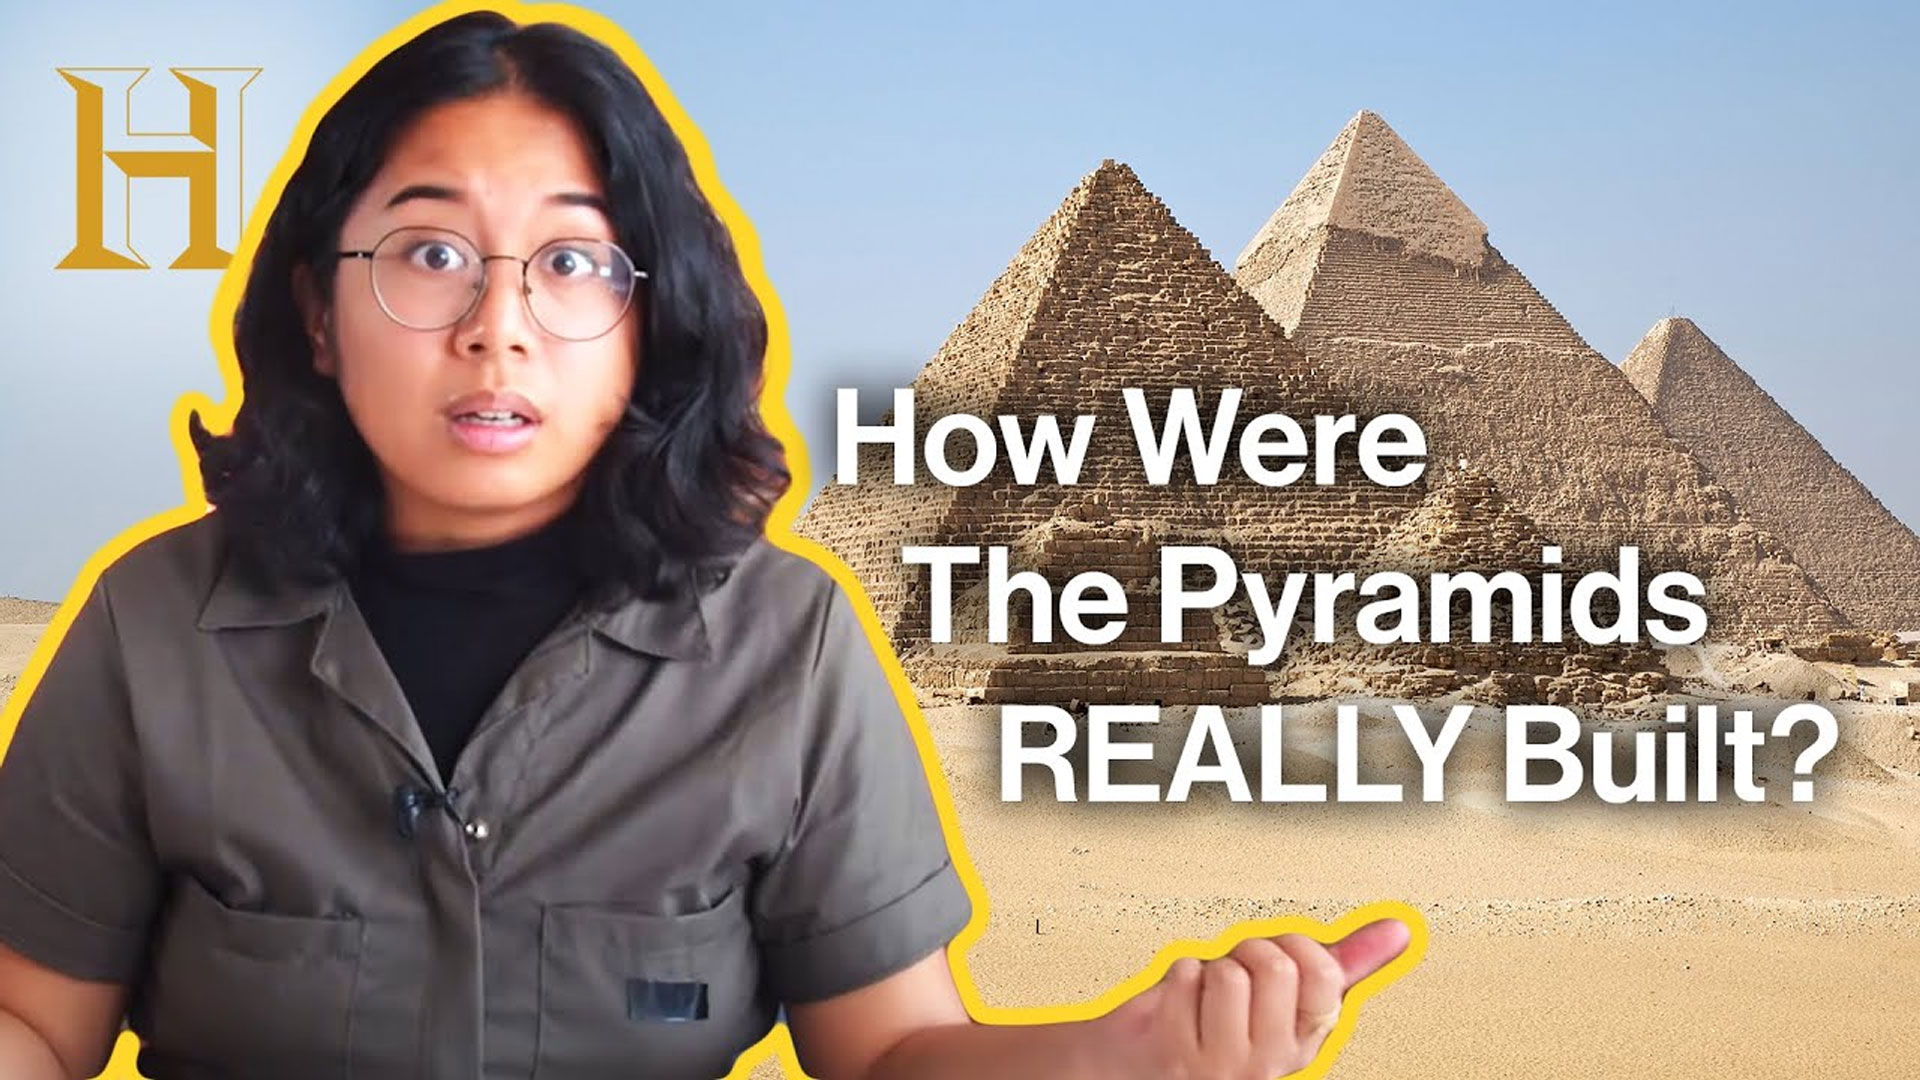 Could the Pyramids Be Made Today?